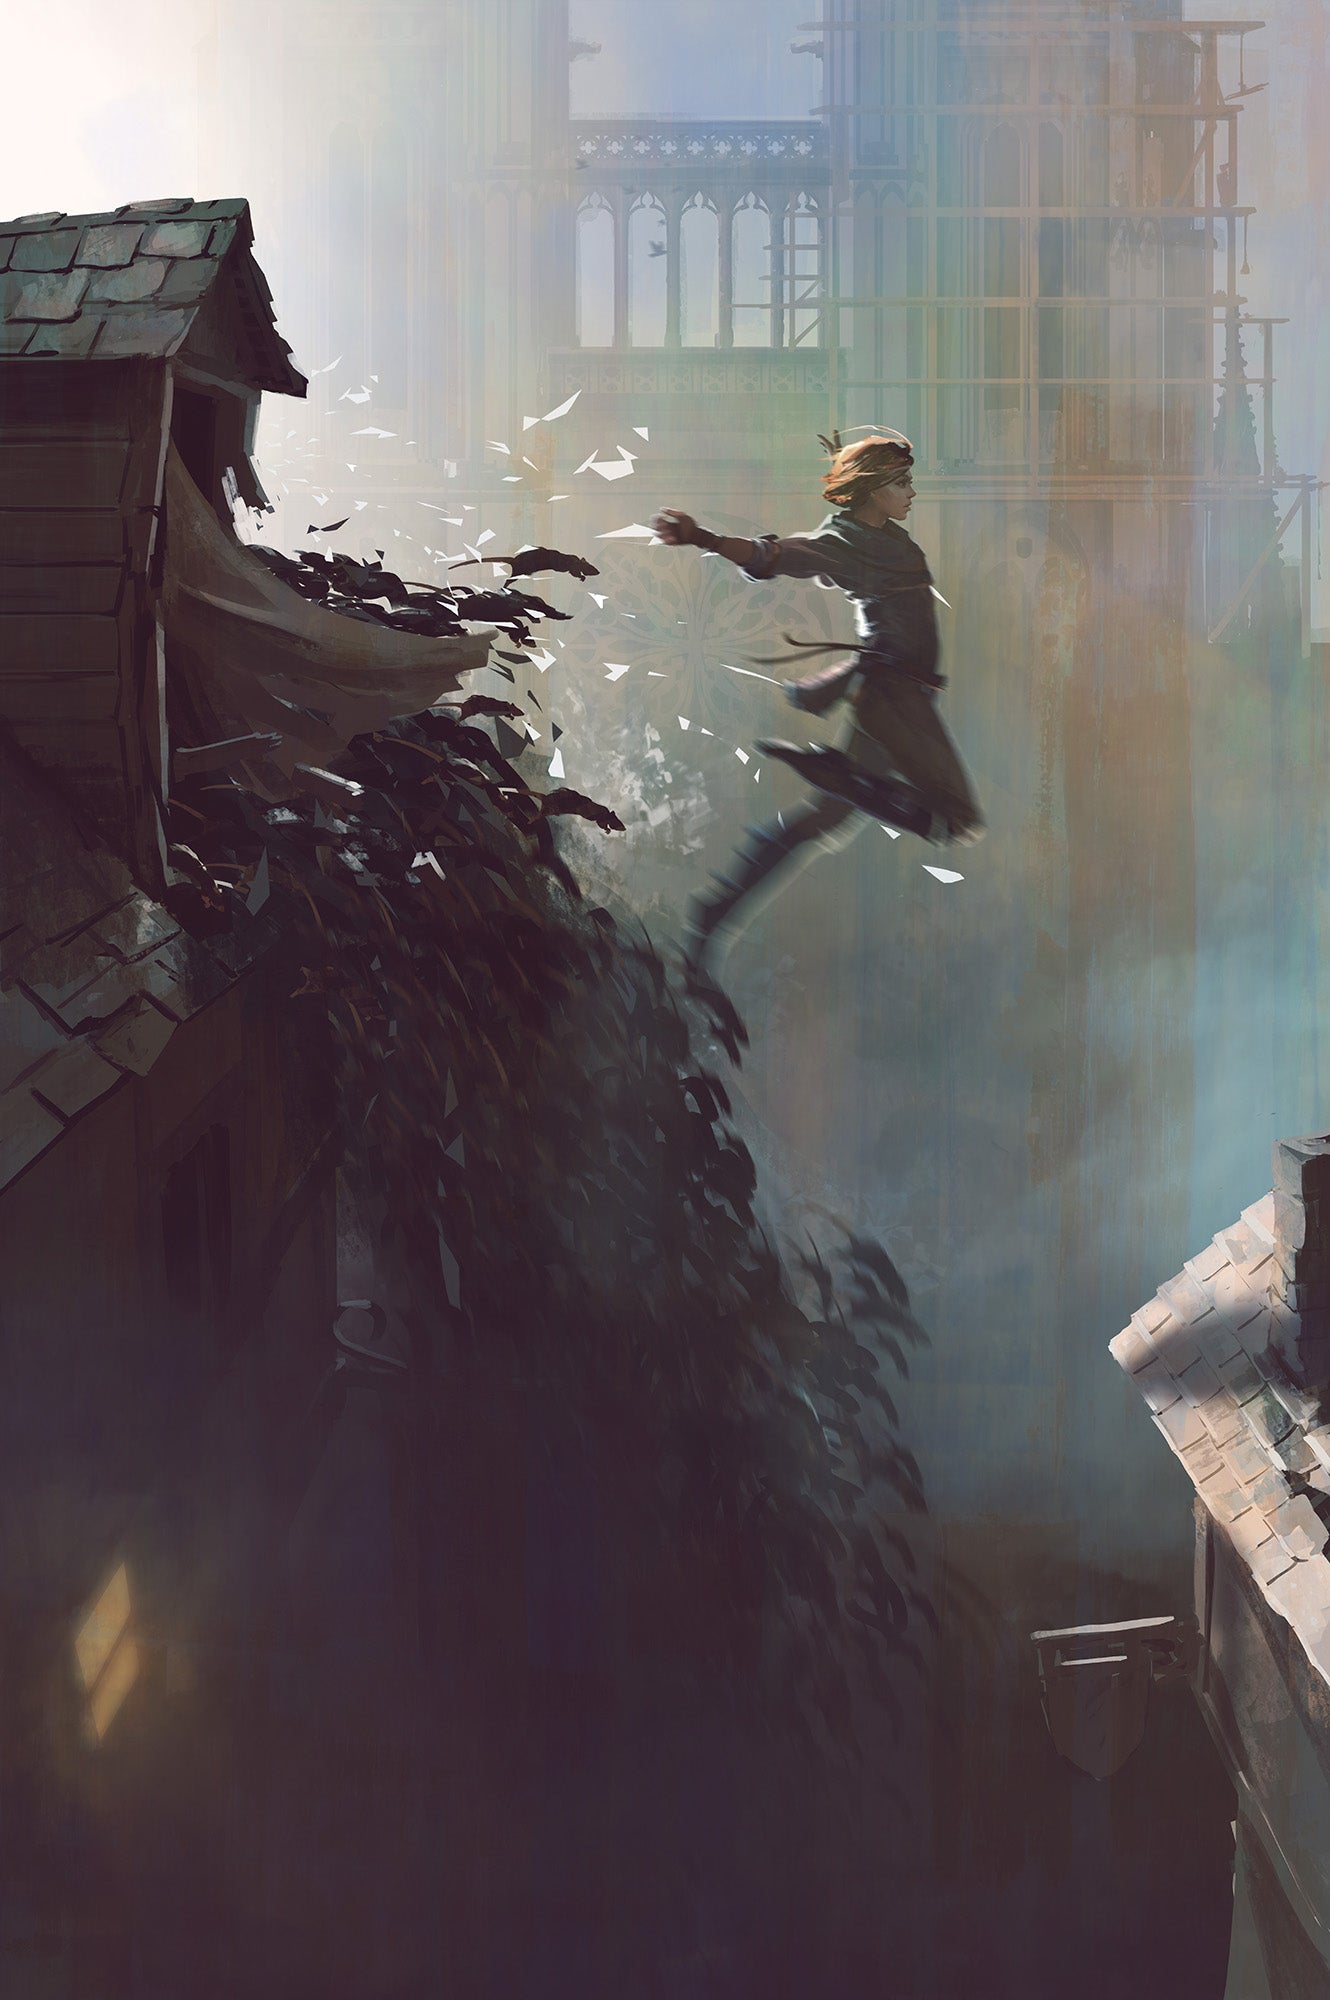 A young woman jumps from a rooftop, chased by a torrent of rats cascading out of a top-floor window.